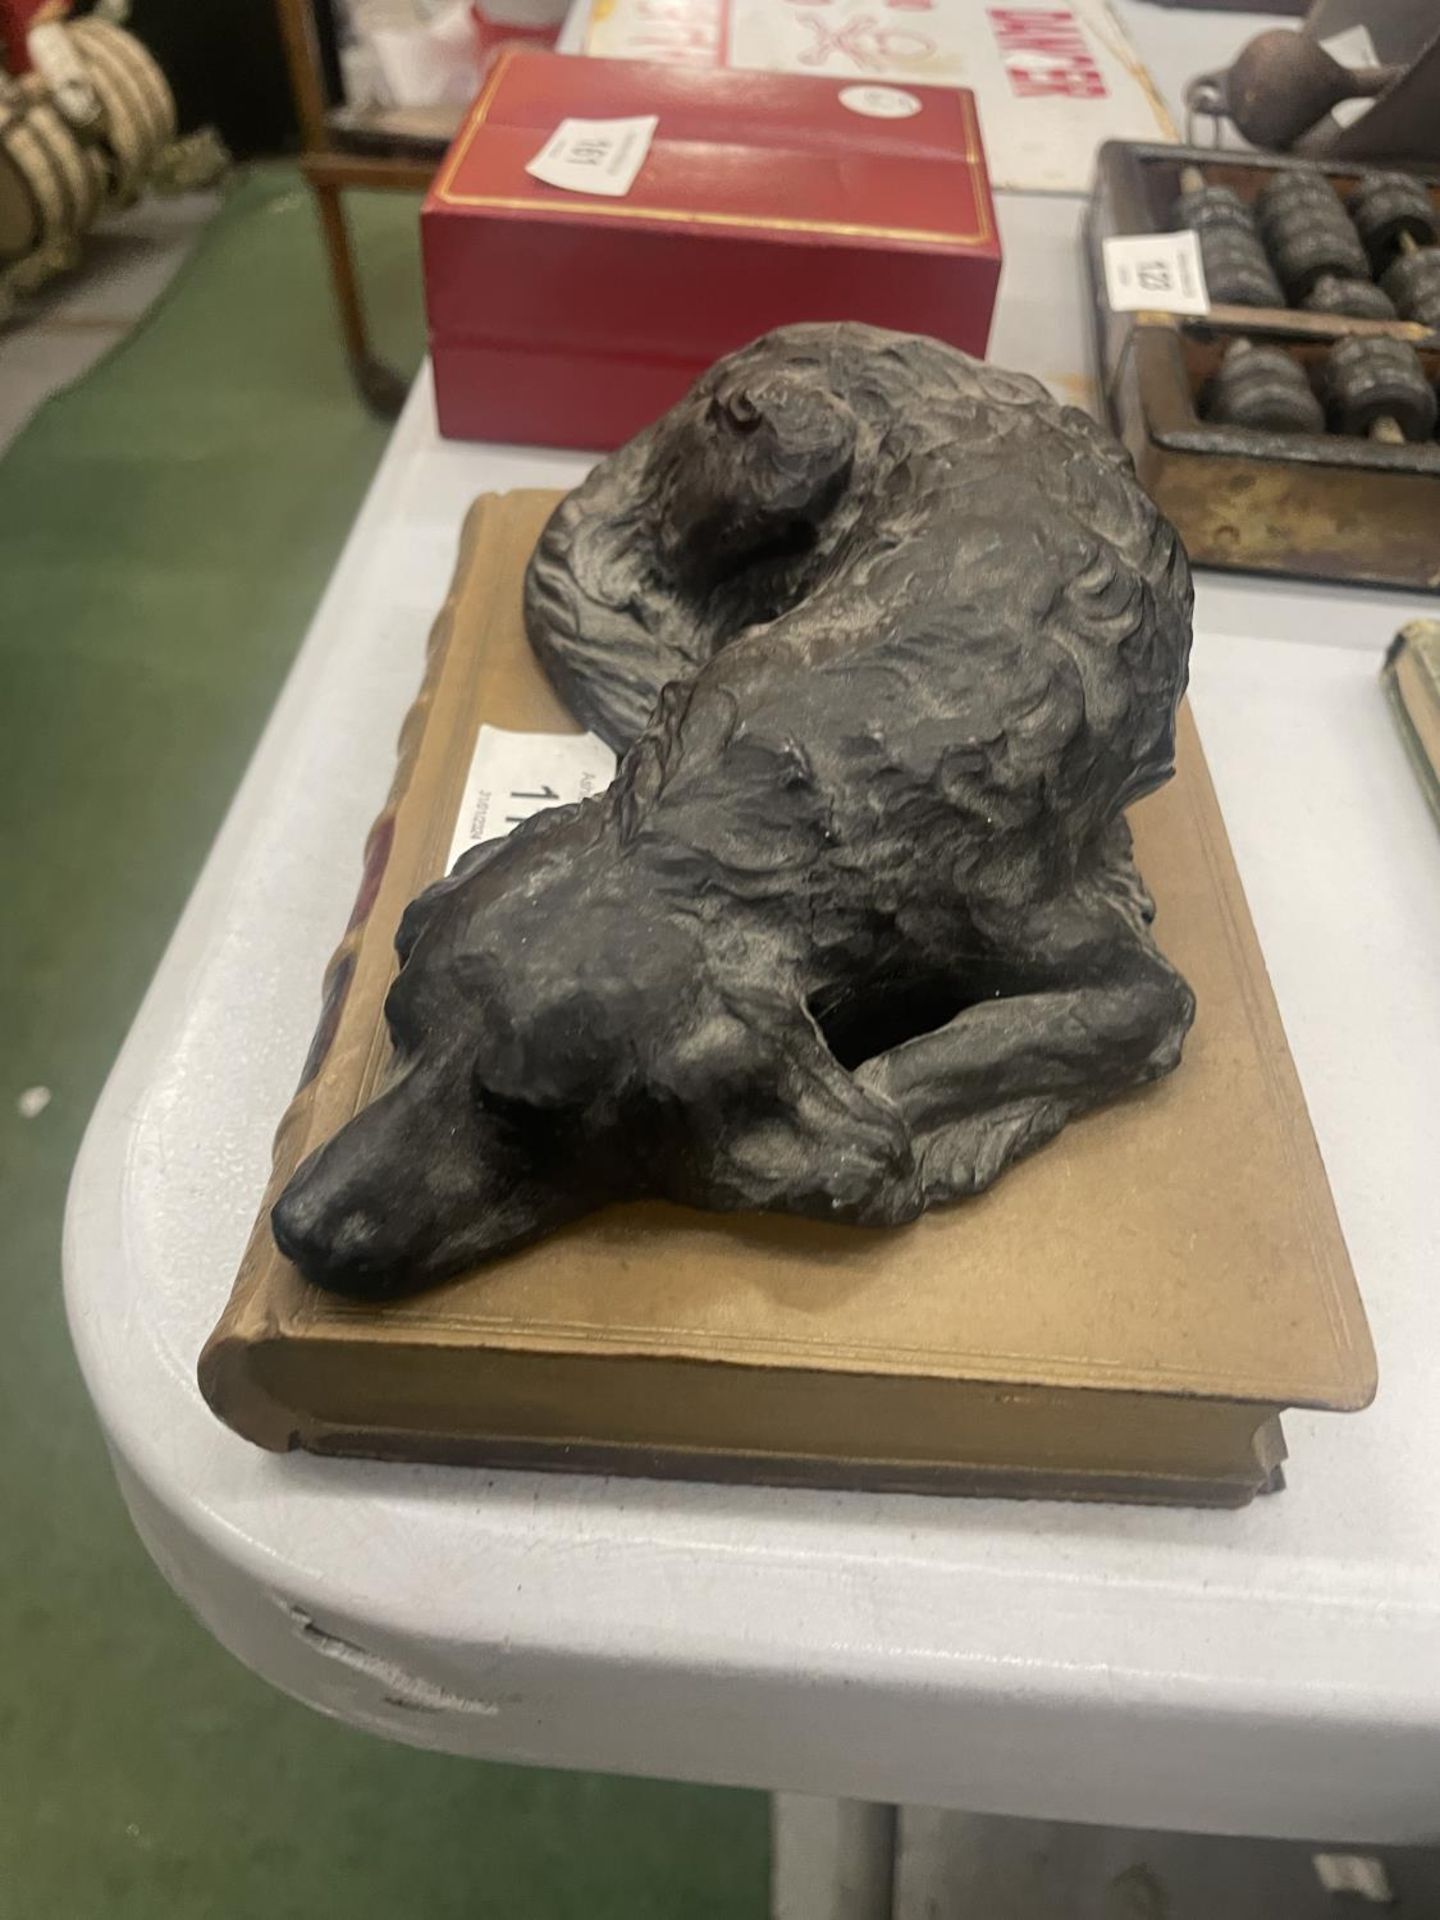 A HEAVY MODEL OF A SLEEPING DOG ON A STONEWARE BOOK, LENGTH 18CM, HEIGHT 7CM - Image 2 of 3